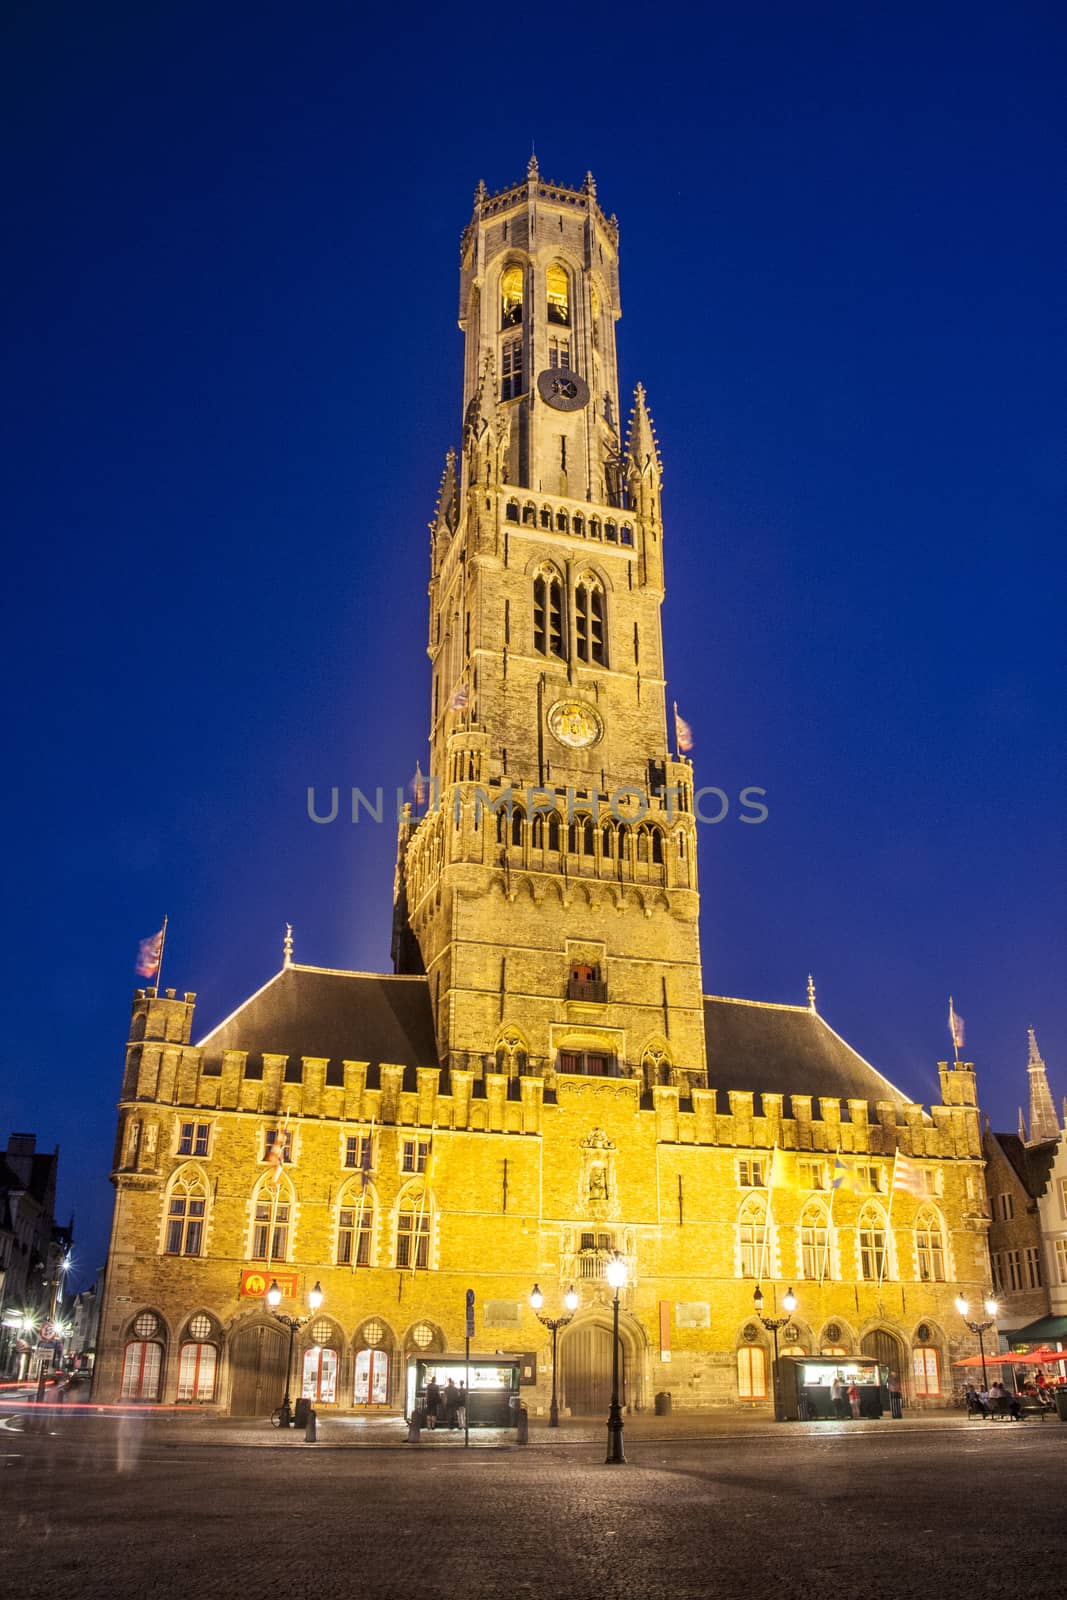 Famous Belfry of Bruges at night

 by A-dam